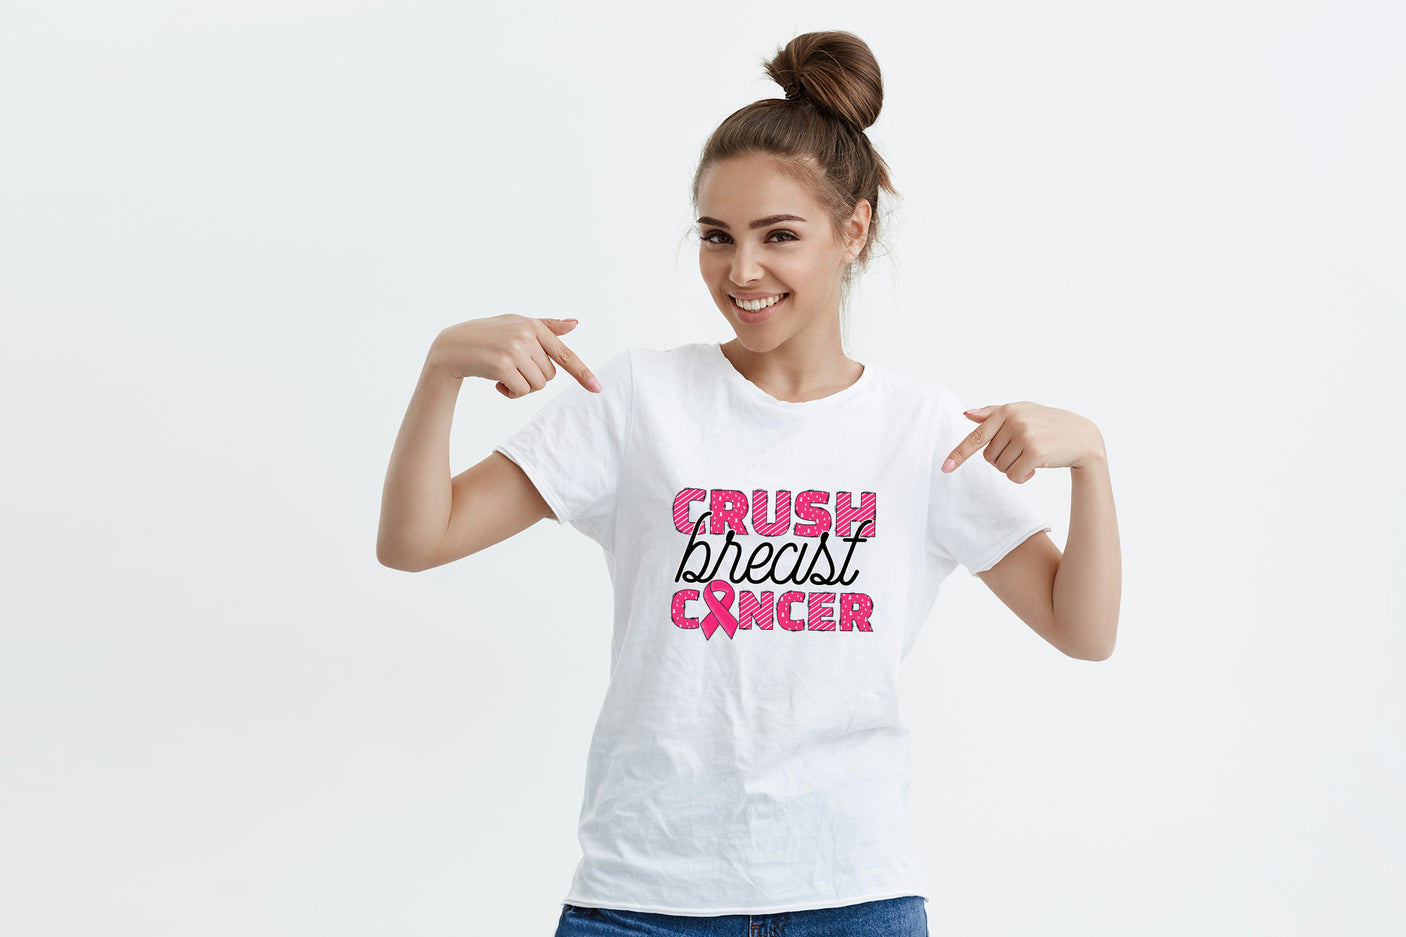 Breast Cancer Sublimation - Crush Breast Cancer